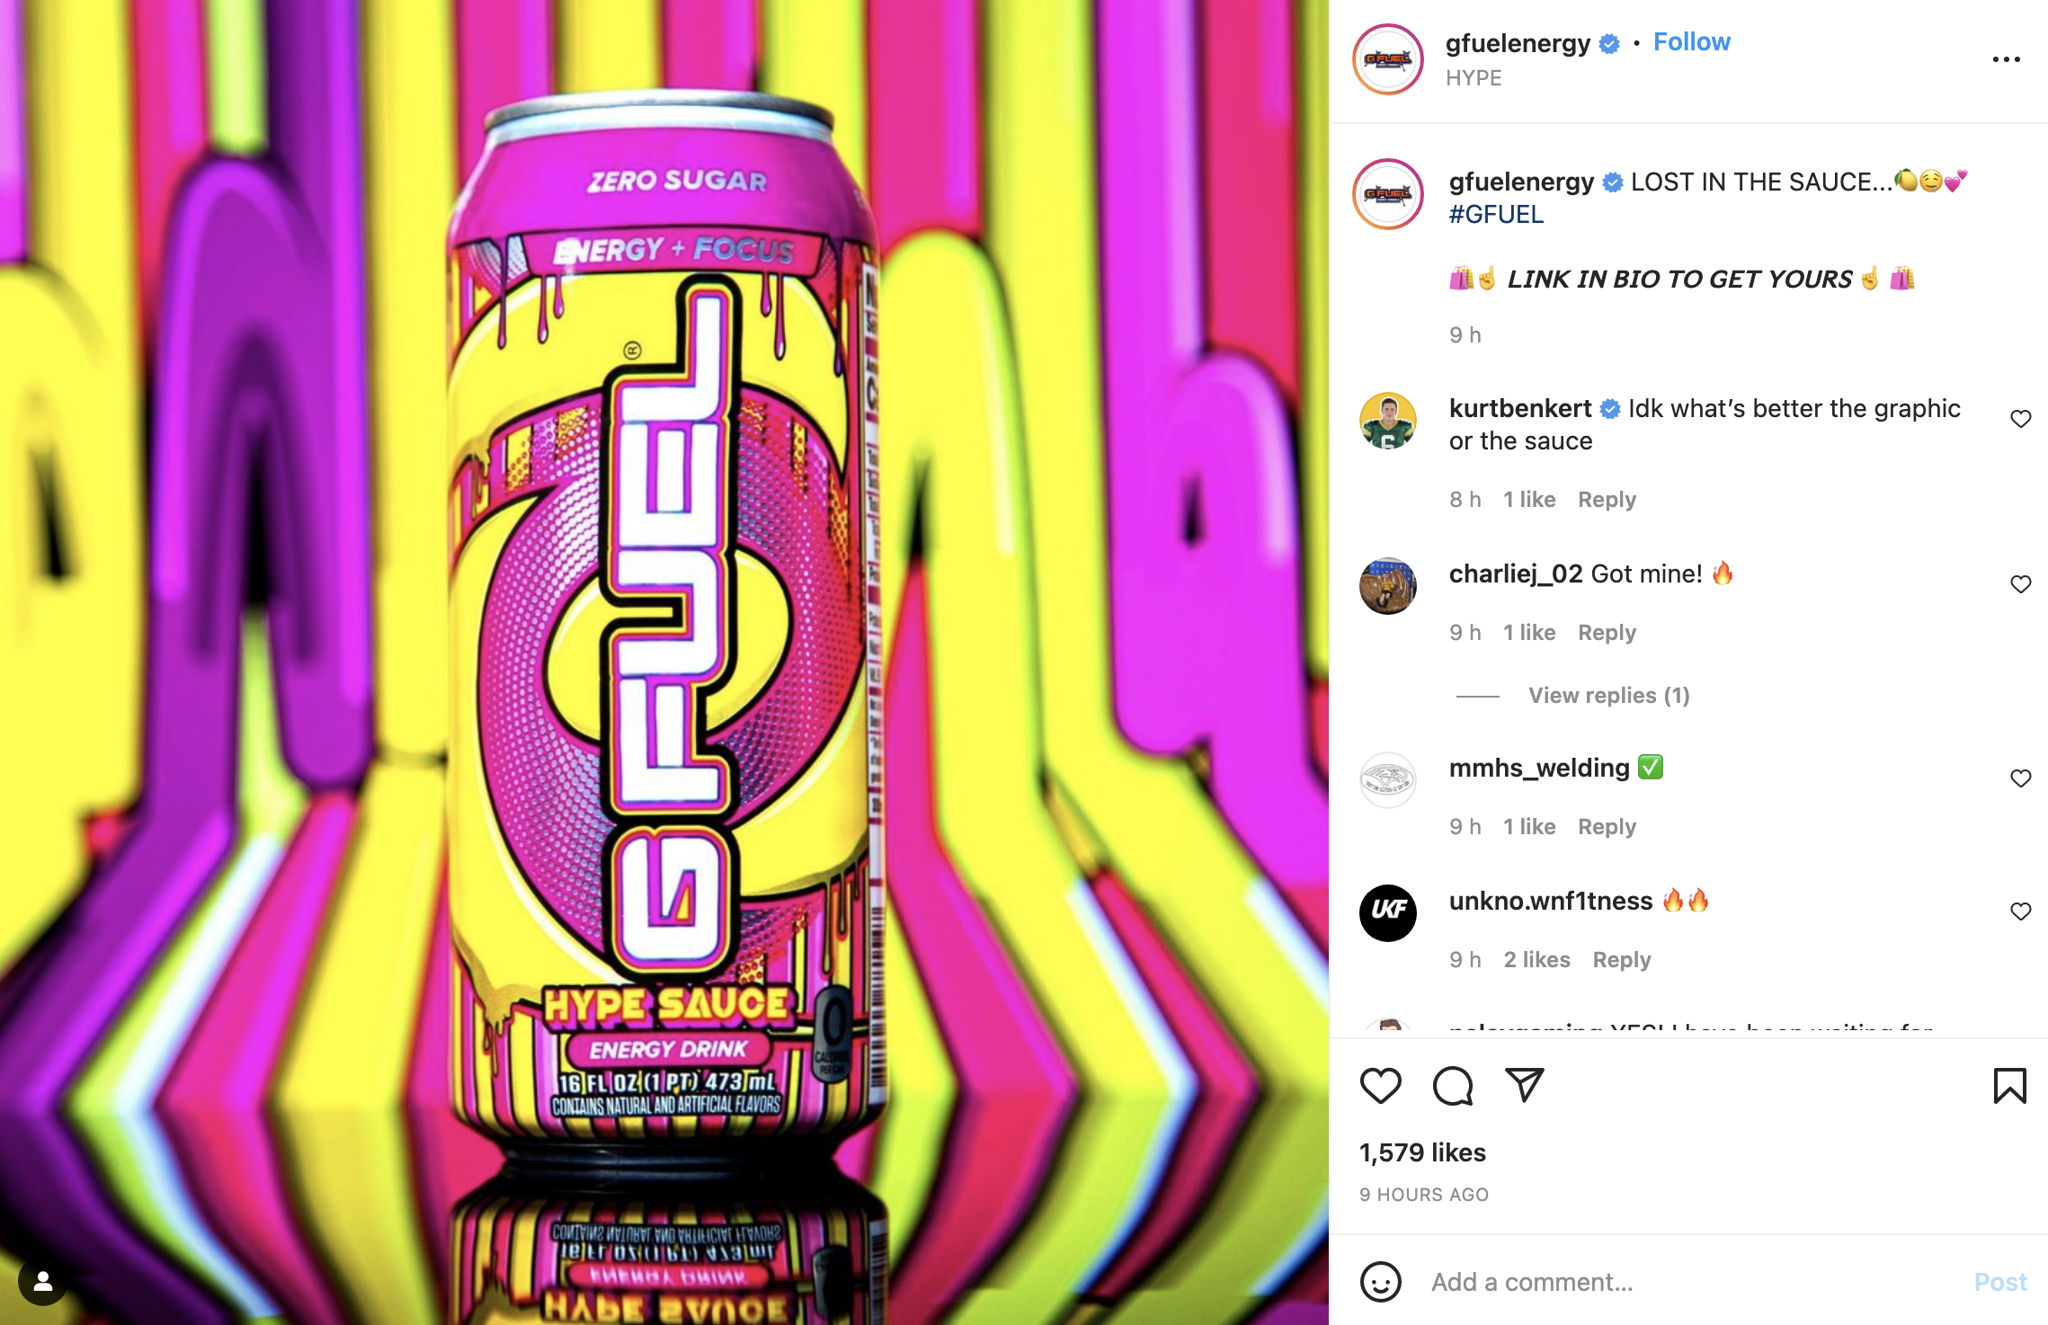 G Fuel Lost in Sauce